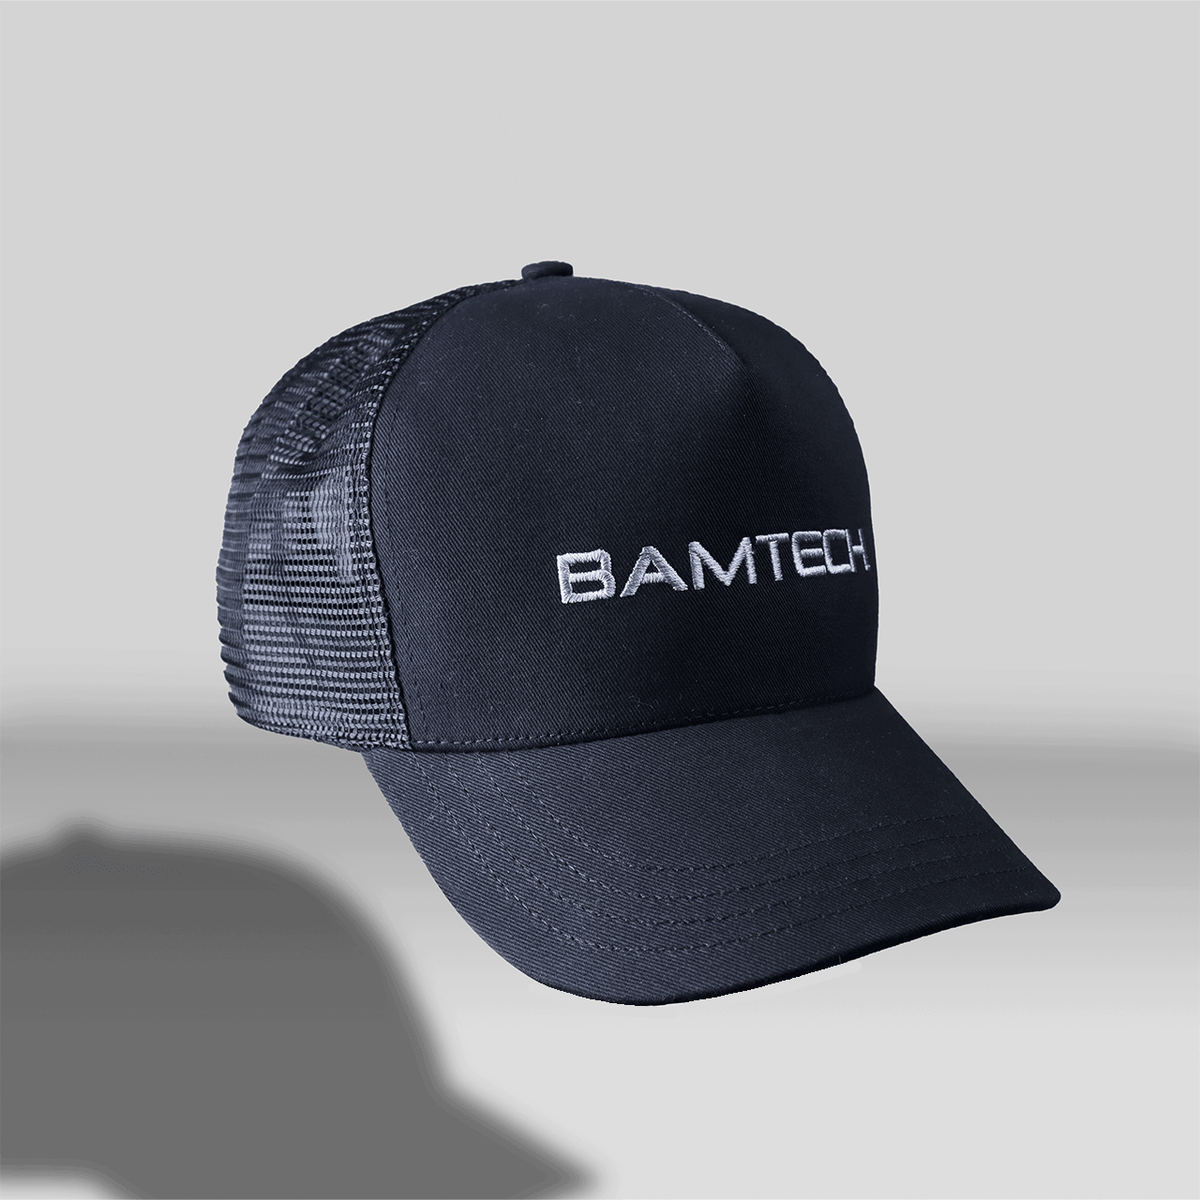 Bamtech: Sustainable Performance Apparel I Can Get On Board With